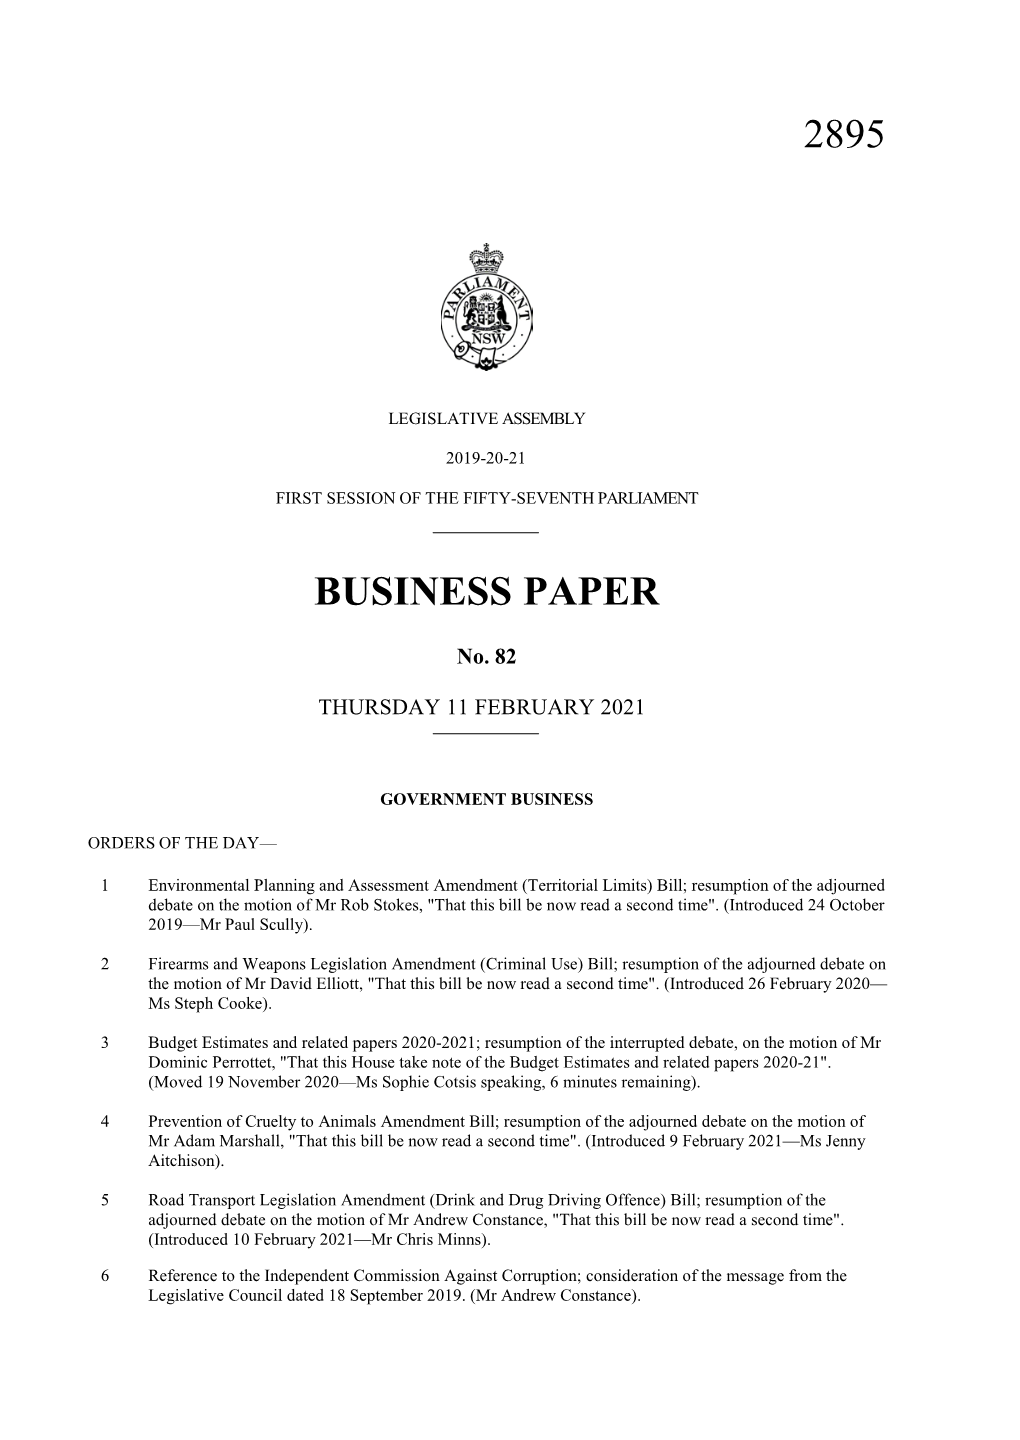 2895 Business Paper